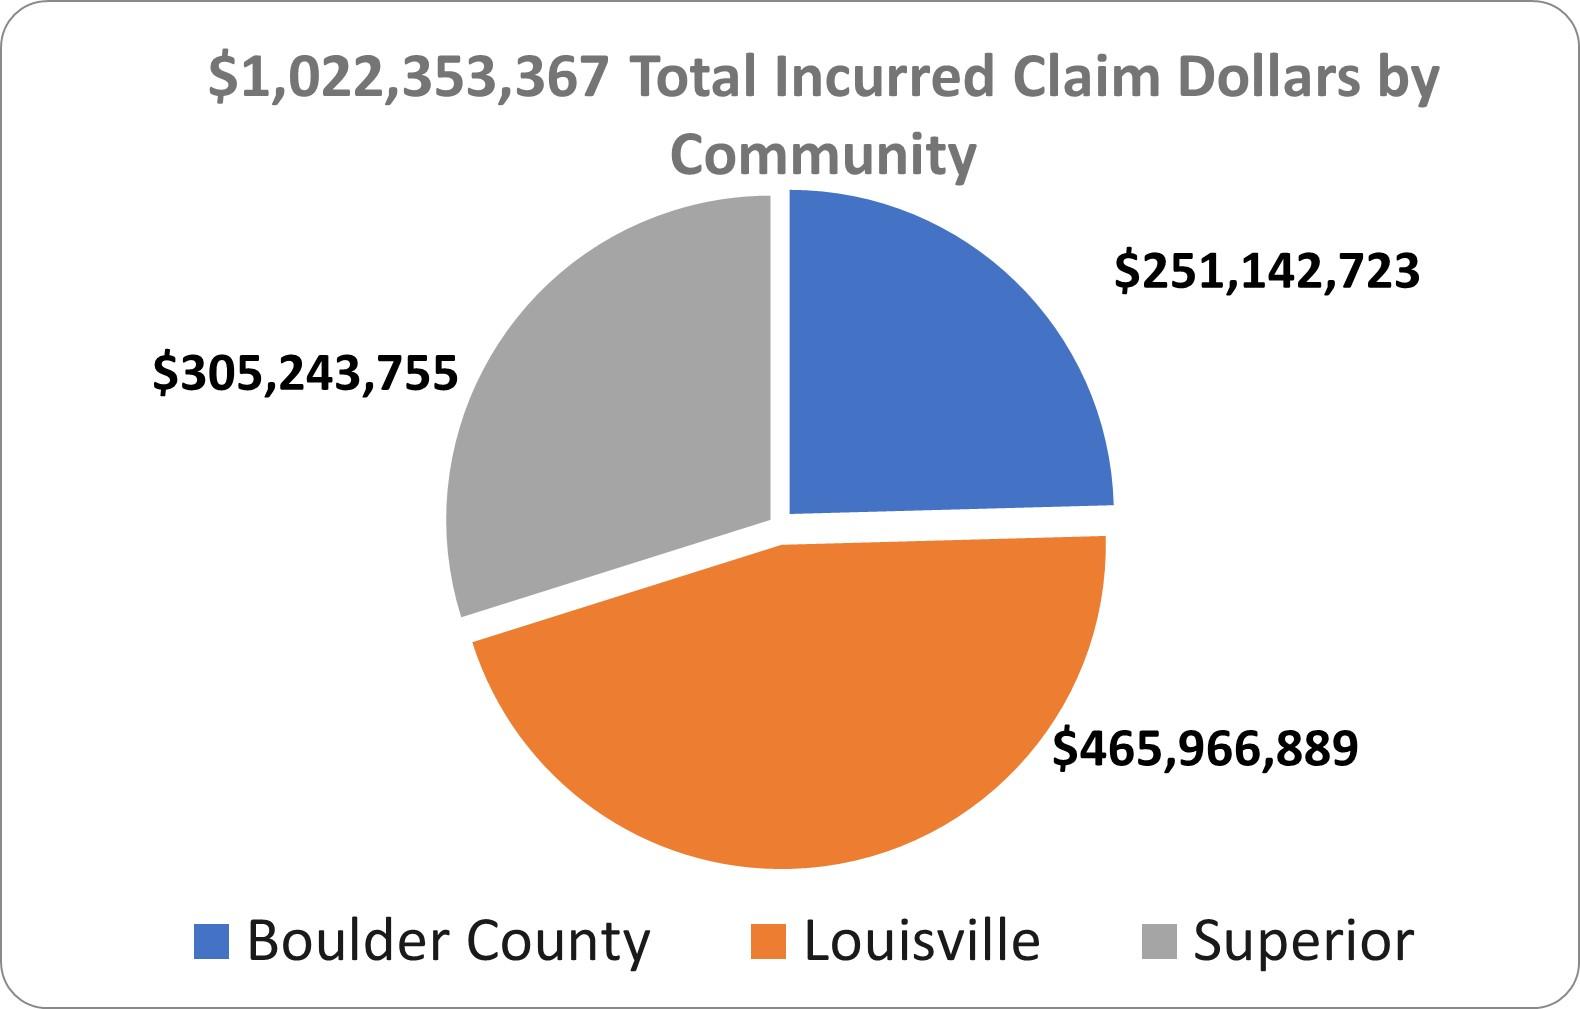 Total Incurred Insurance Claims Dollars so far for Marshall Fire: $1,022,353,367 ($465,966,889 in Louisville, $305,243,755 in Superior, and $251,142,723 in unincorporated Boulder County)